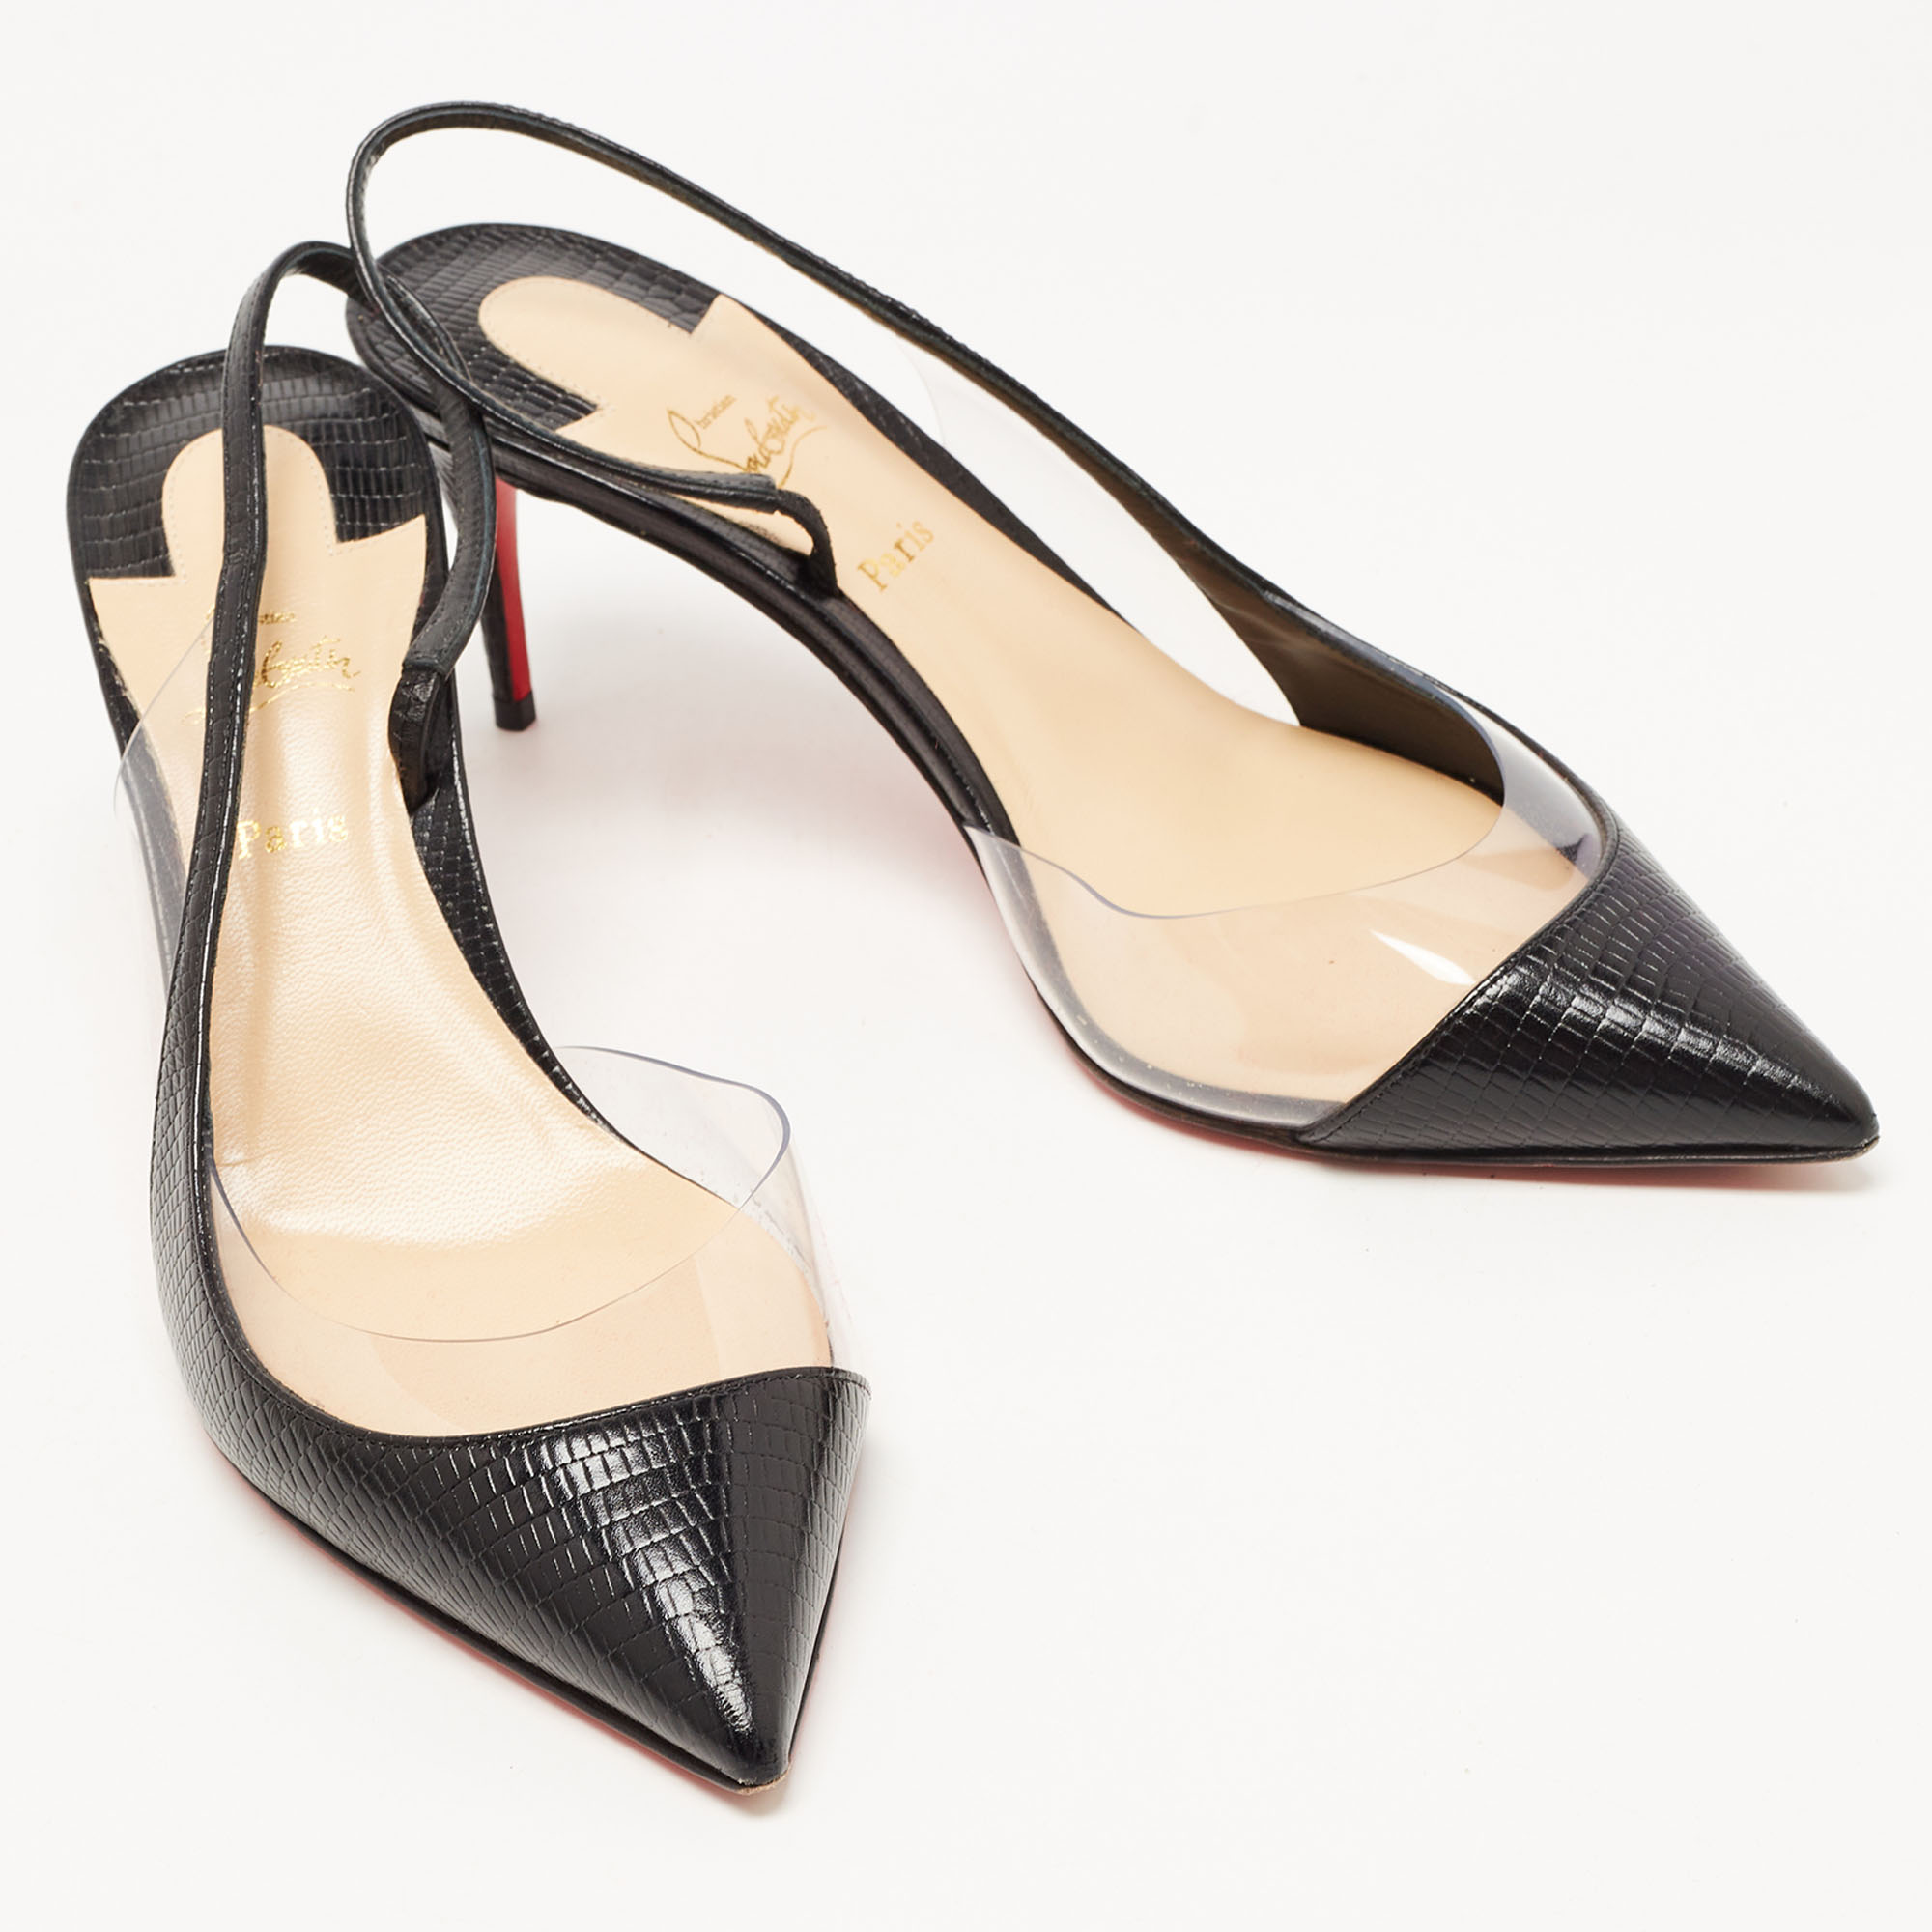 Christian Louboutin Black Lizard Embossed Leather And PVC Optisexy Pumps Size 37.5